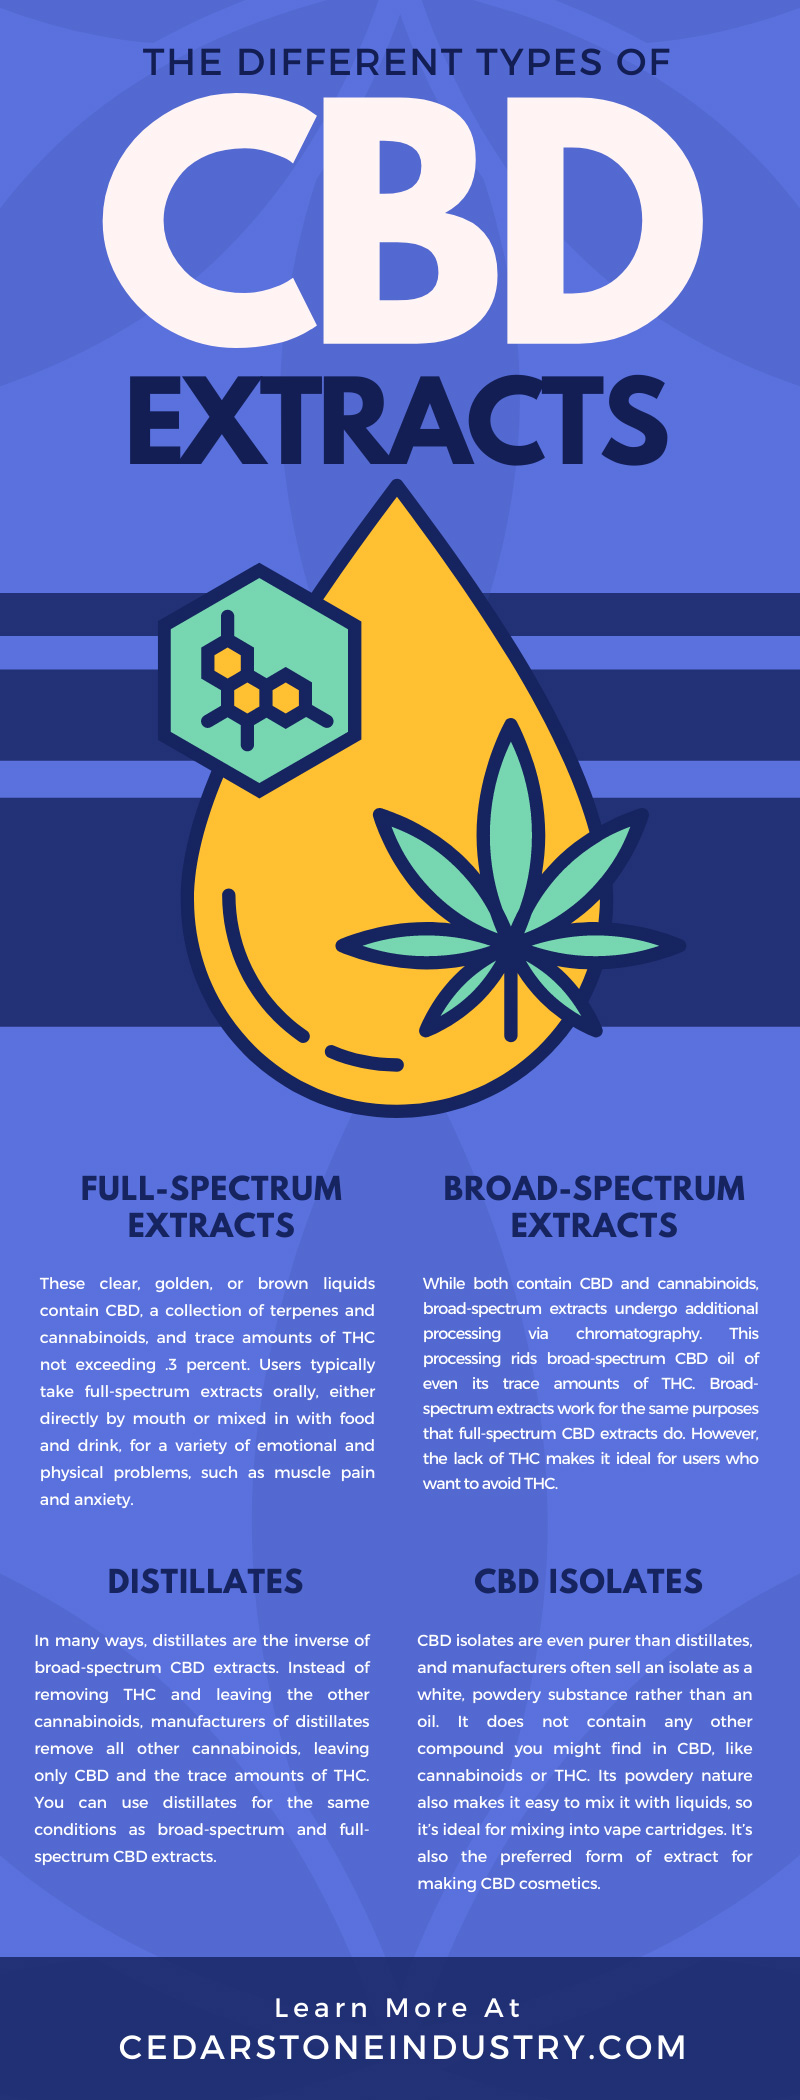 The Different Types of CBD Extracts